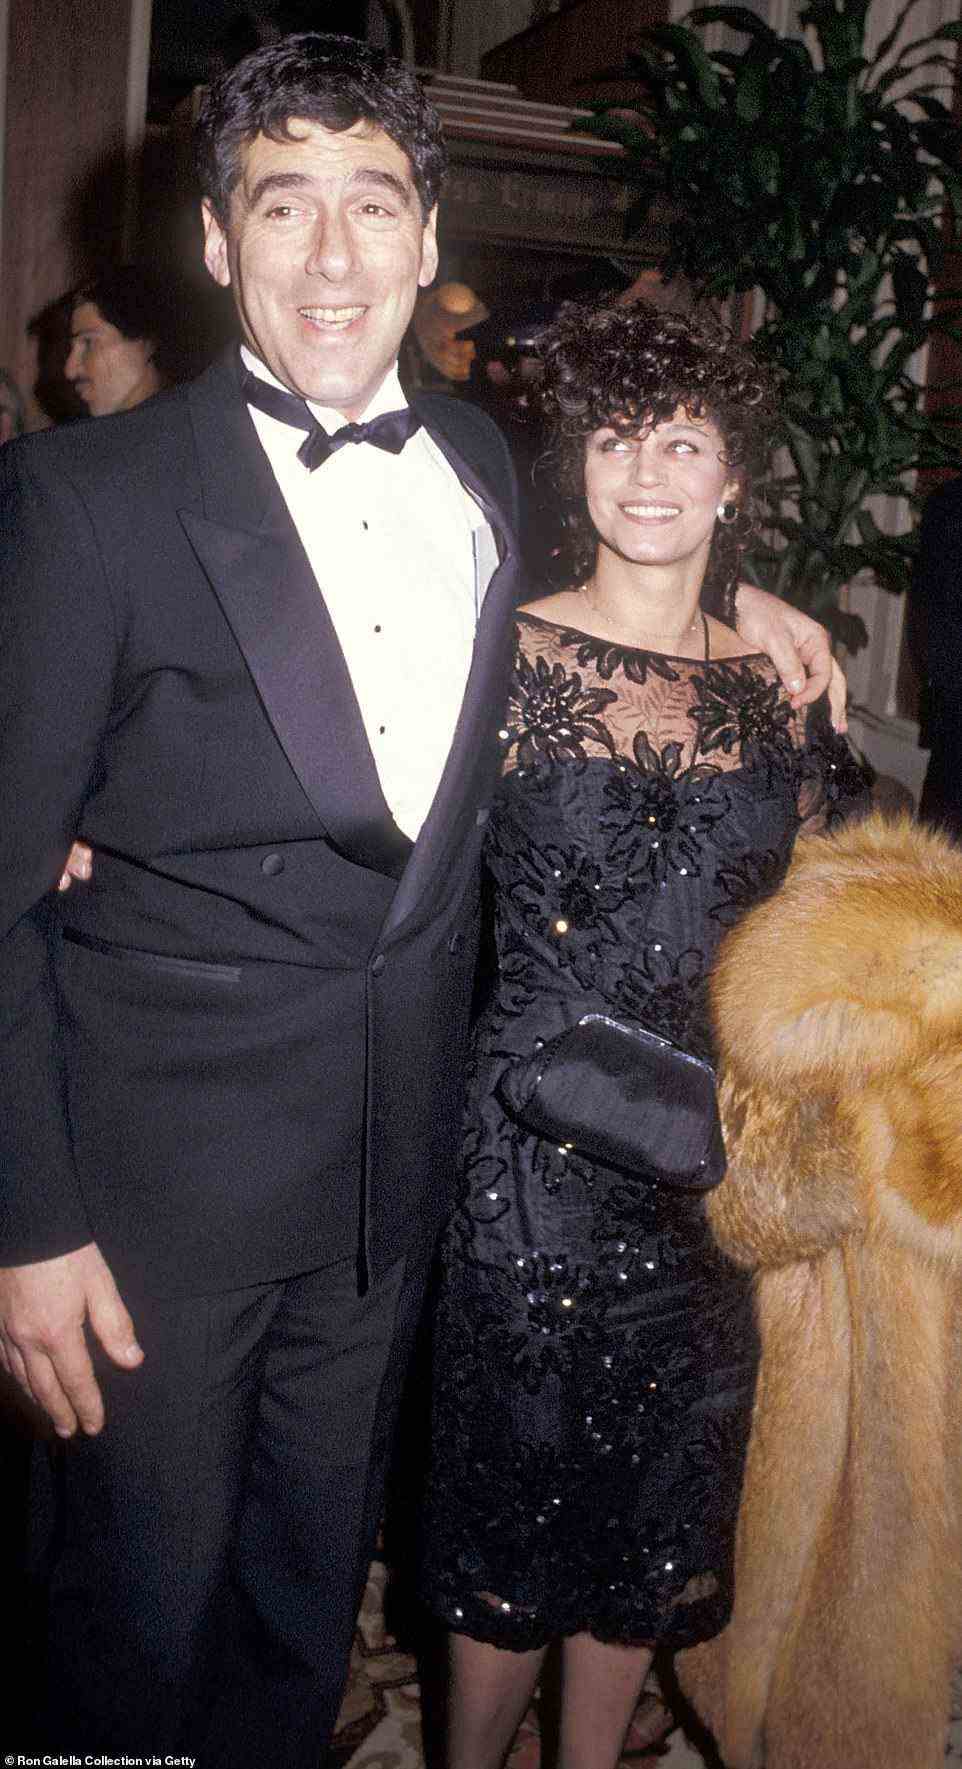 Then, in 1973, he married Jennifer Bogart (pictured together in 1985). They briefly split in 1975 but got back together three years later, before they ultimately divorced in 1989. They share two kids